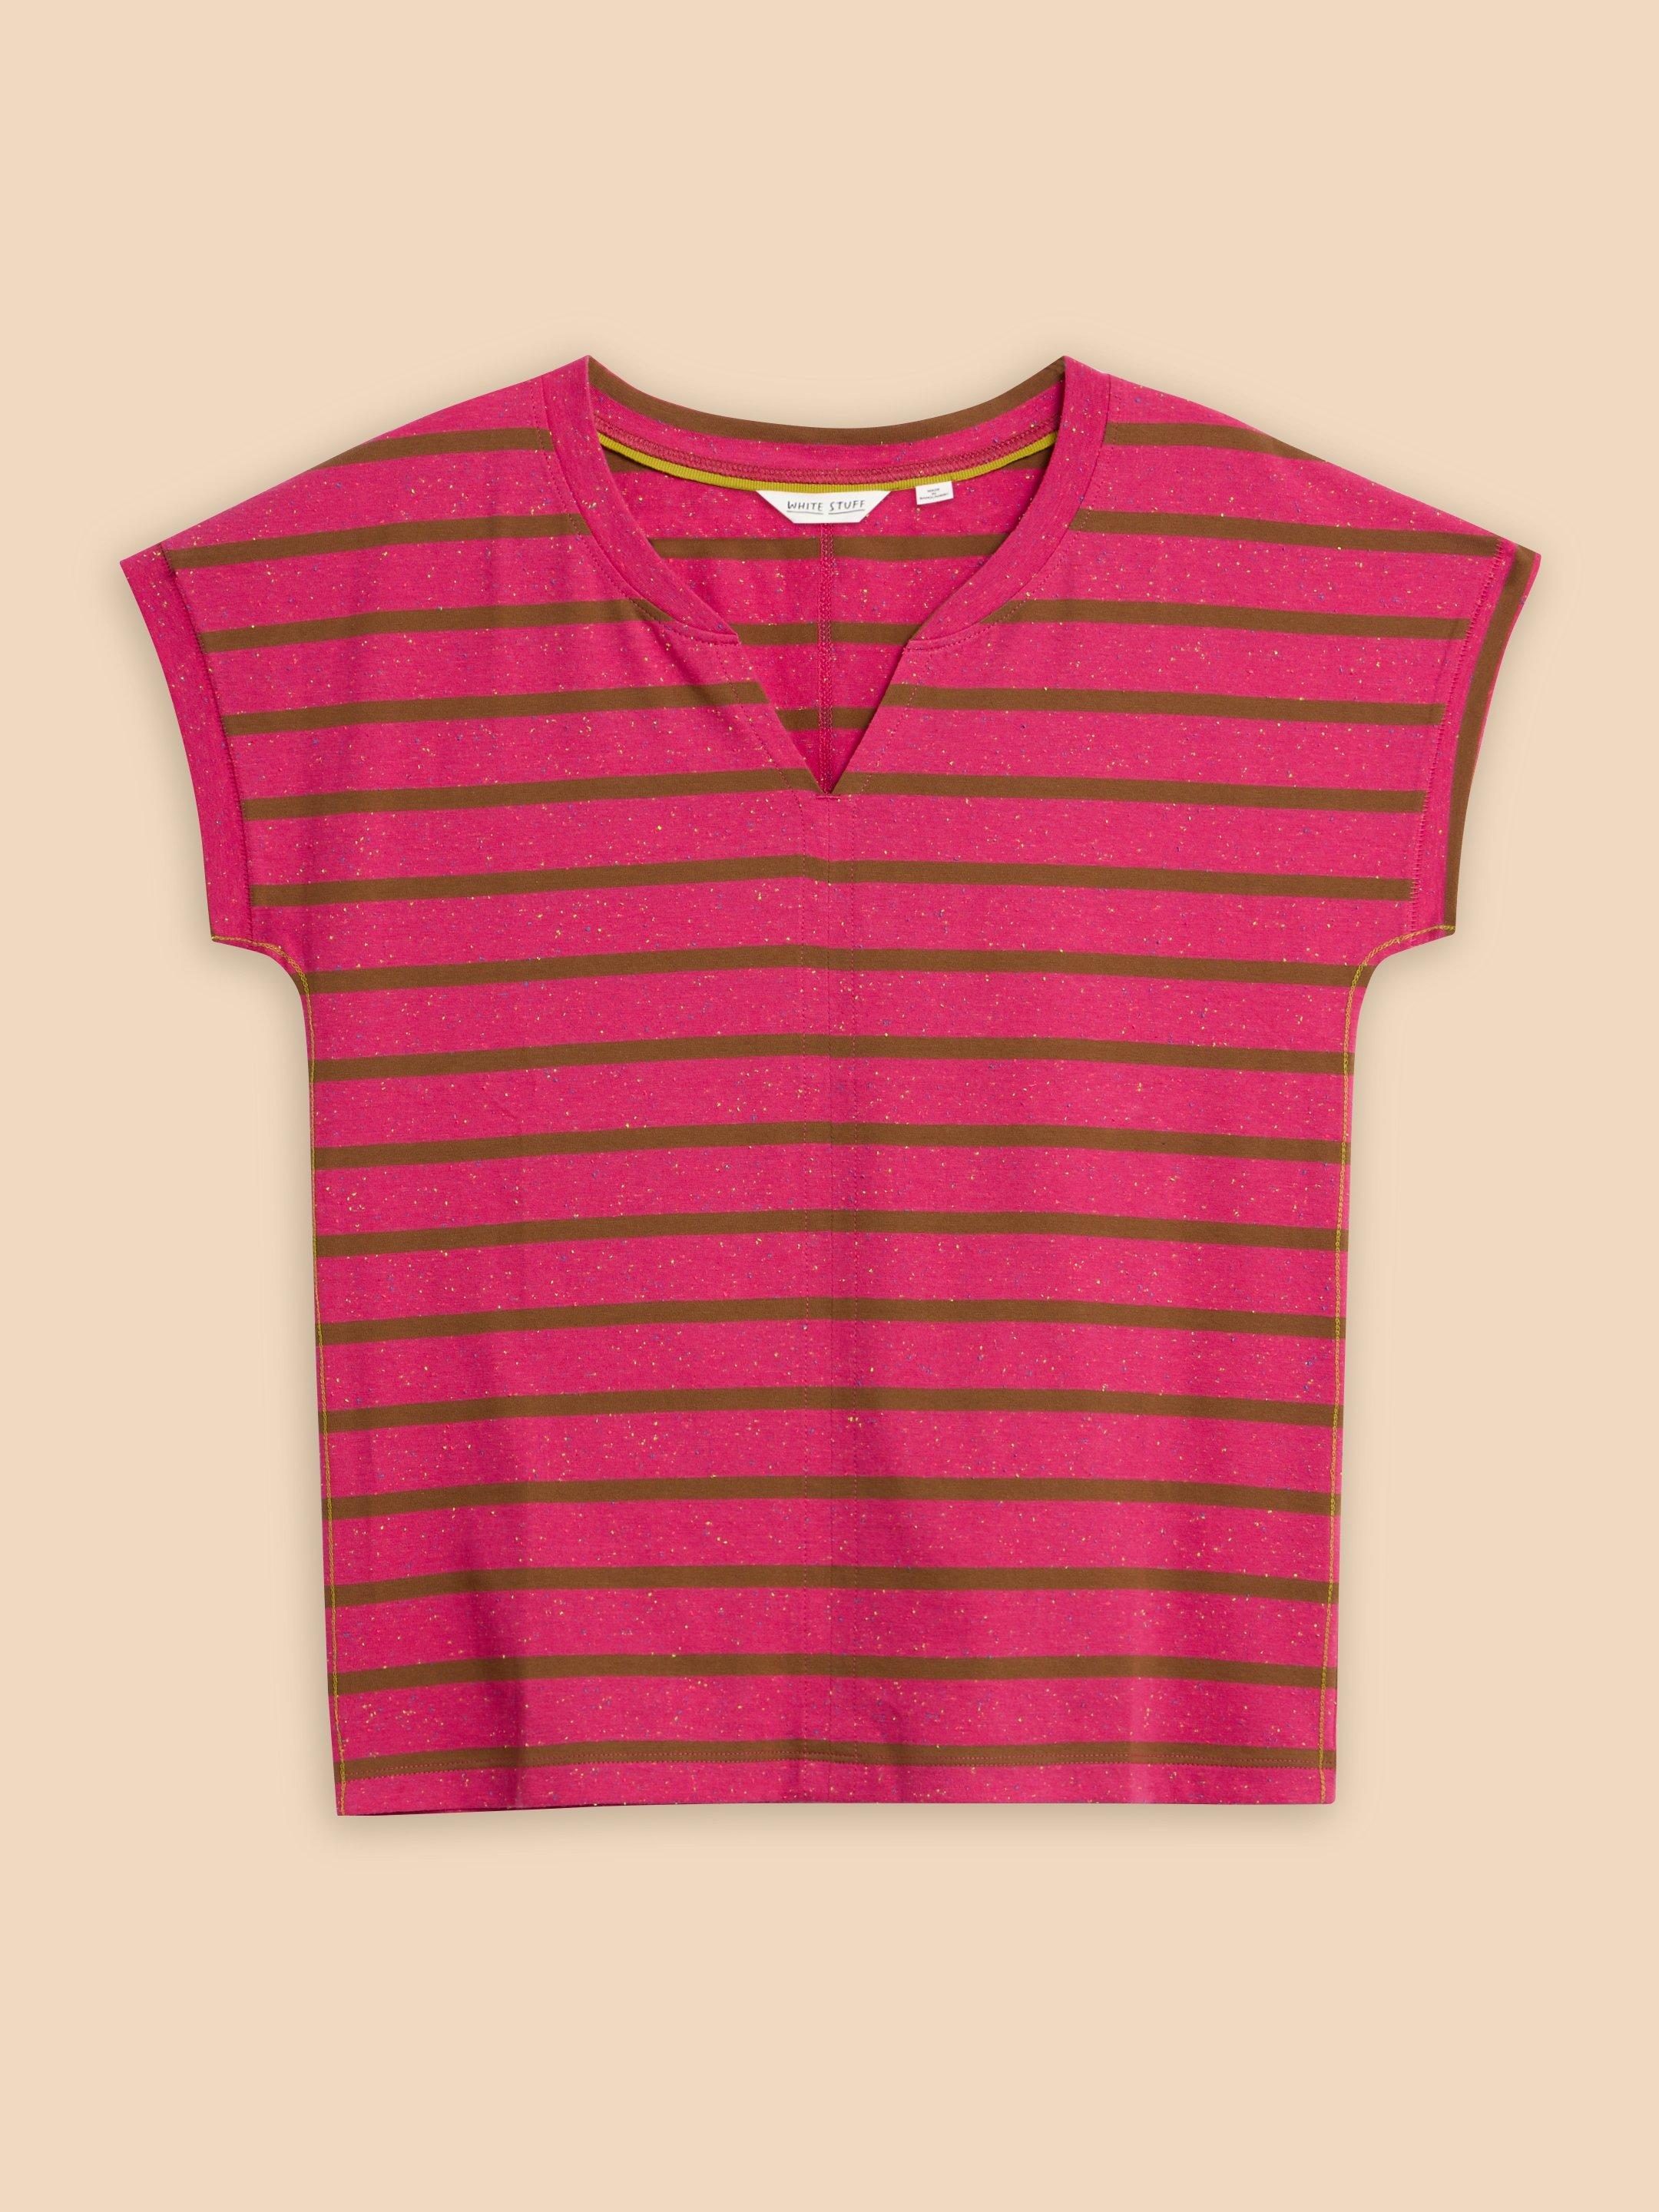 NELLY NOTCH NECK NEP TEE in PINK MLT - FLAT FRONT